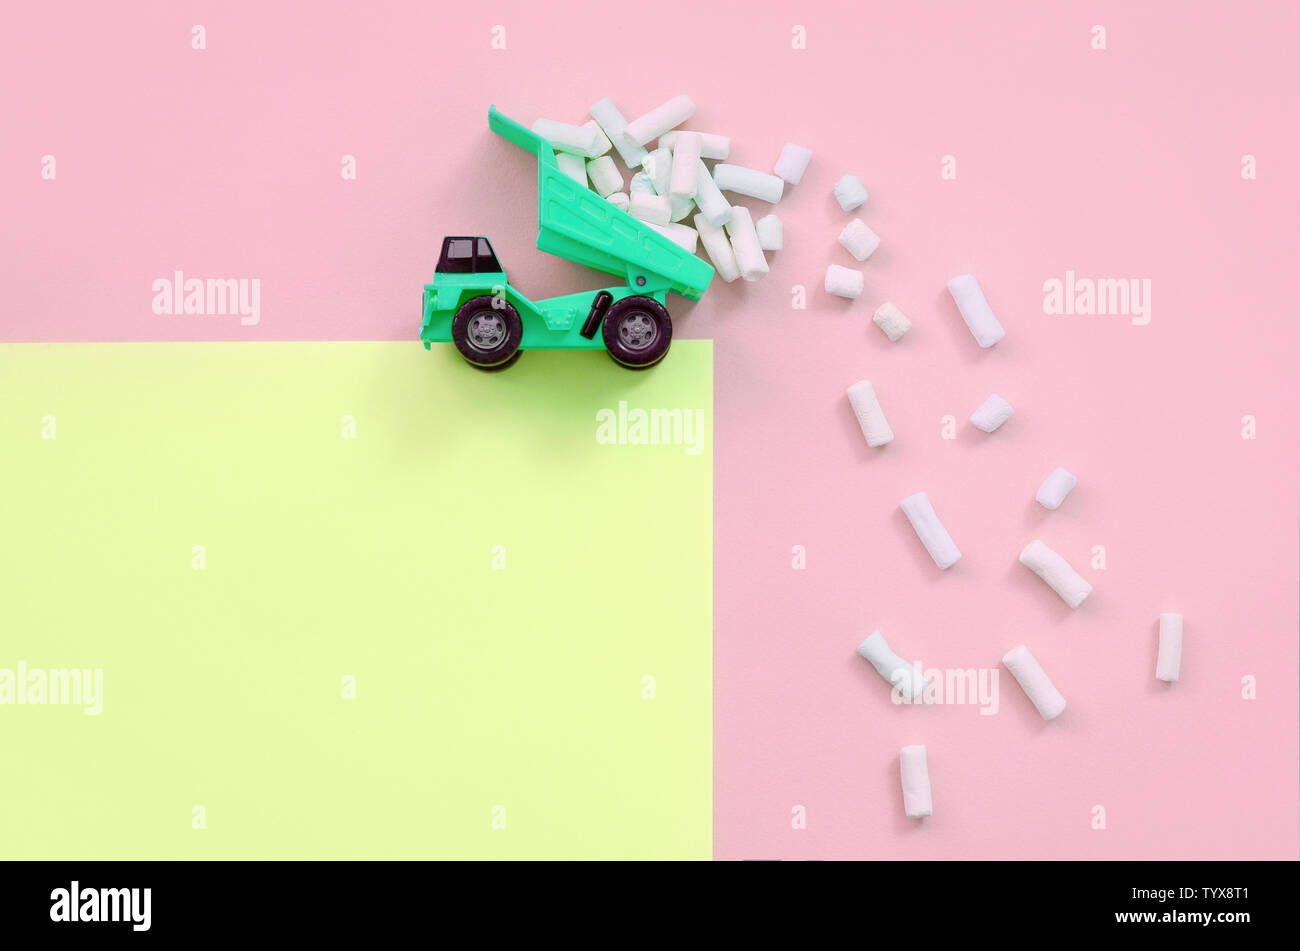 Green little toy dump truck throws marshmallow pieces from its raised back on a pastel yellow and coral background. Flat lay minimal top view. Stock Photo